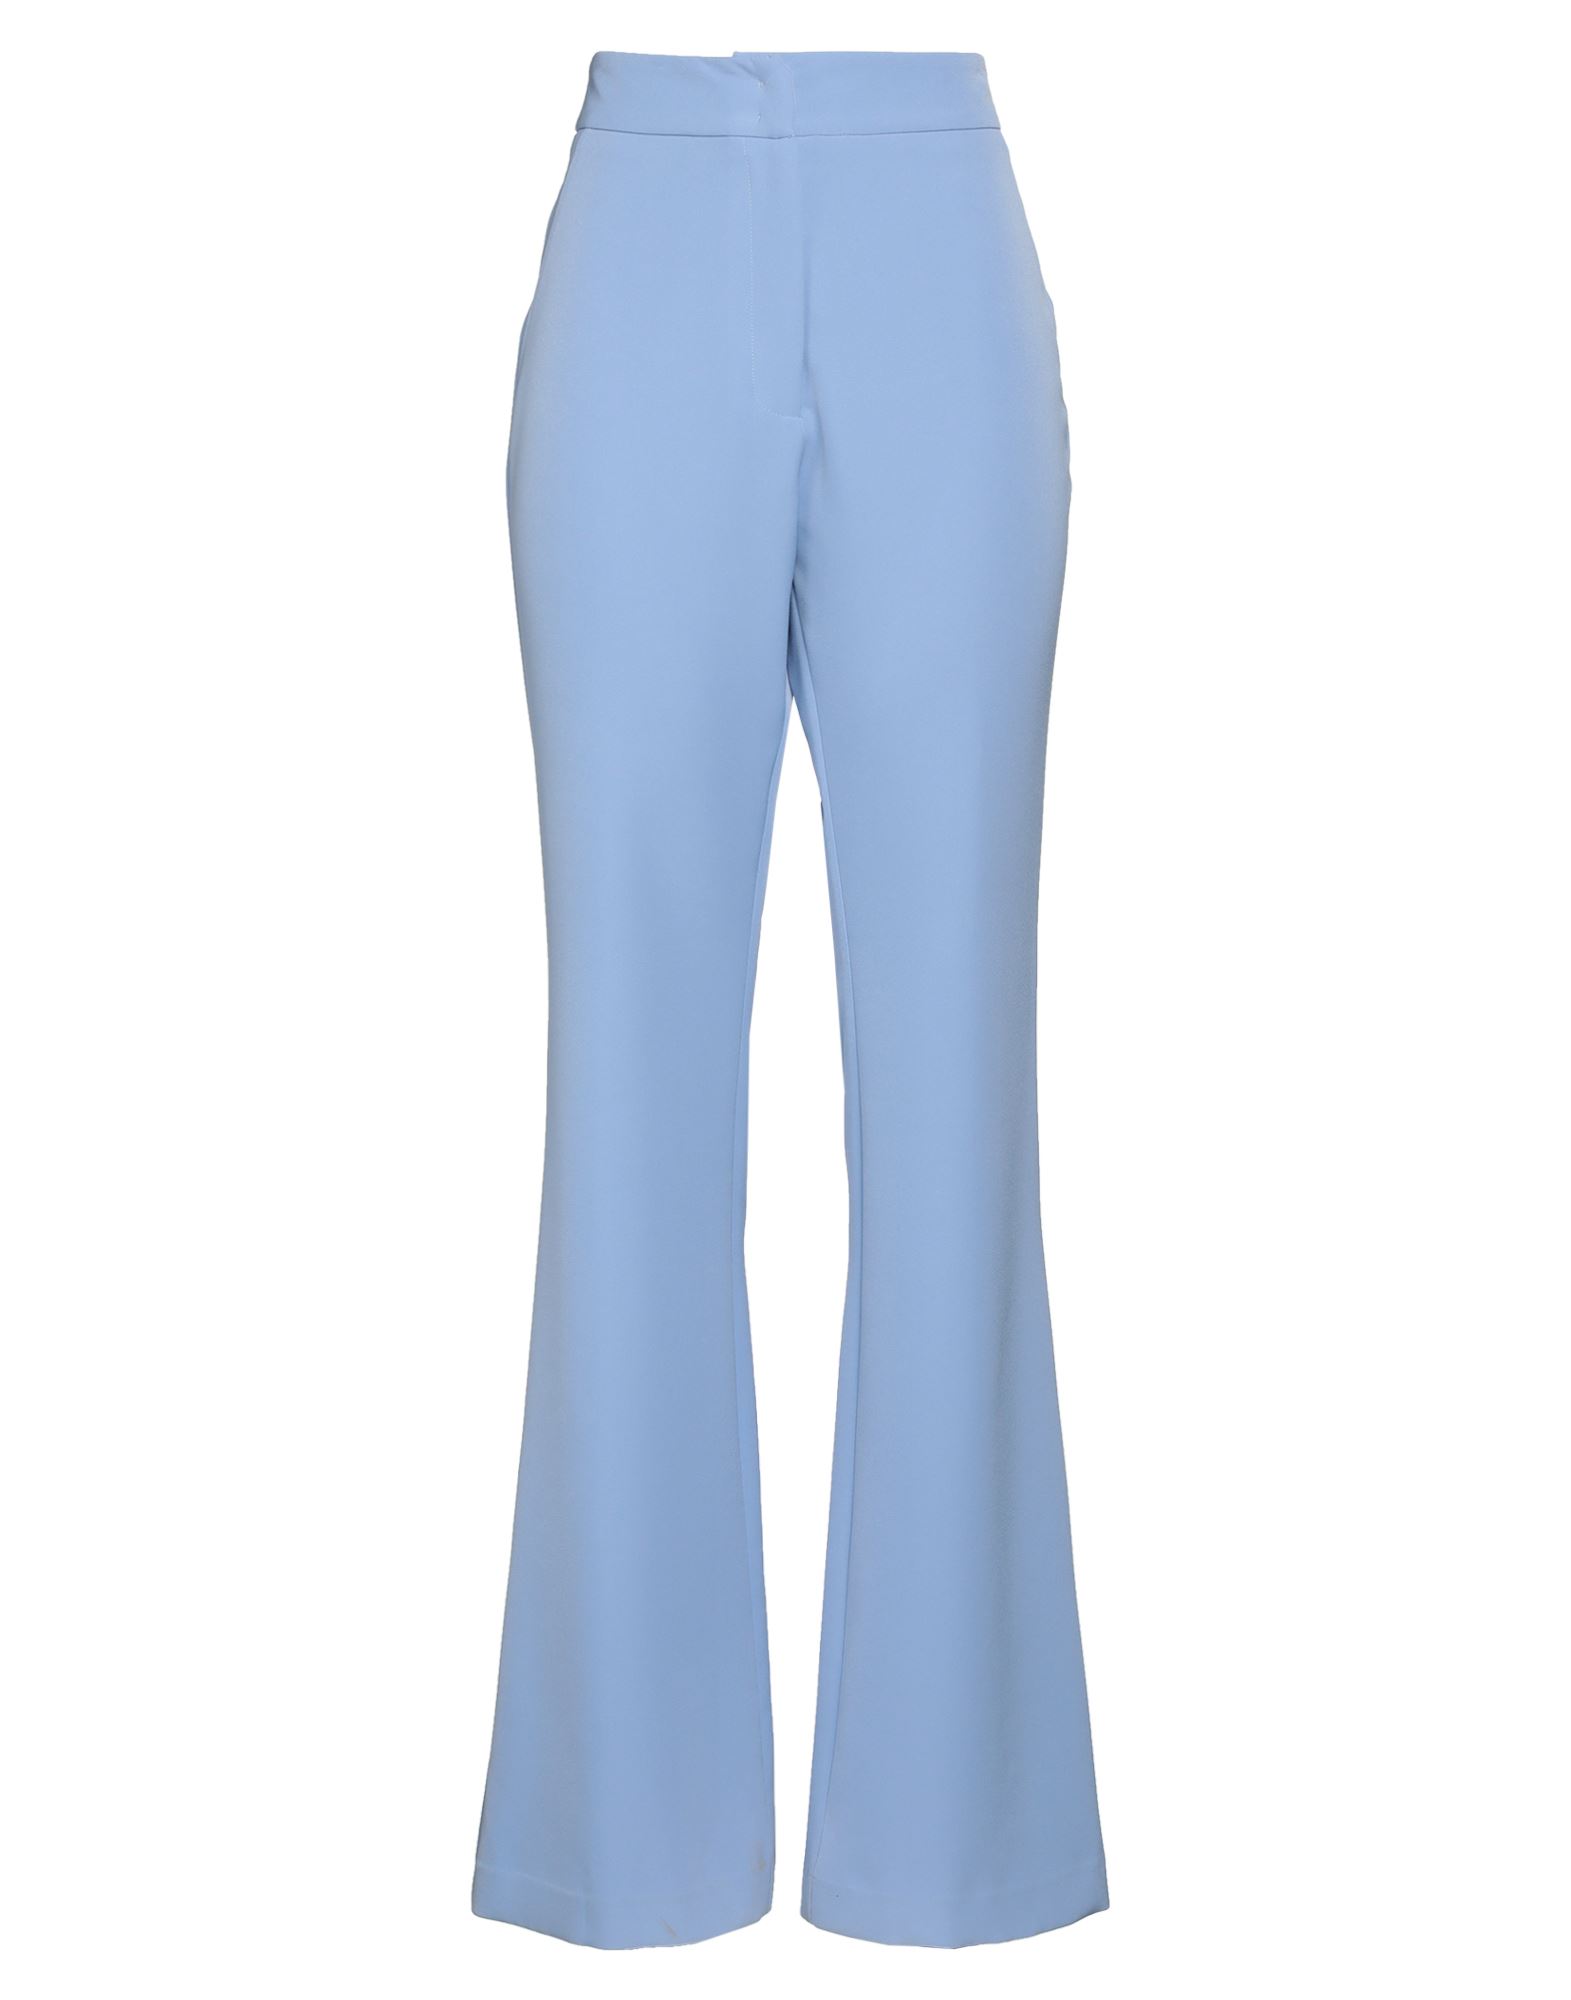 SILENCE LIMITED SILENCE LIMITED WOMAN PANTS SKY BLUE SIZE S POLYESTER, ELASTANE